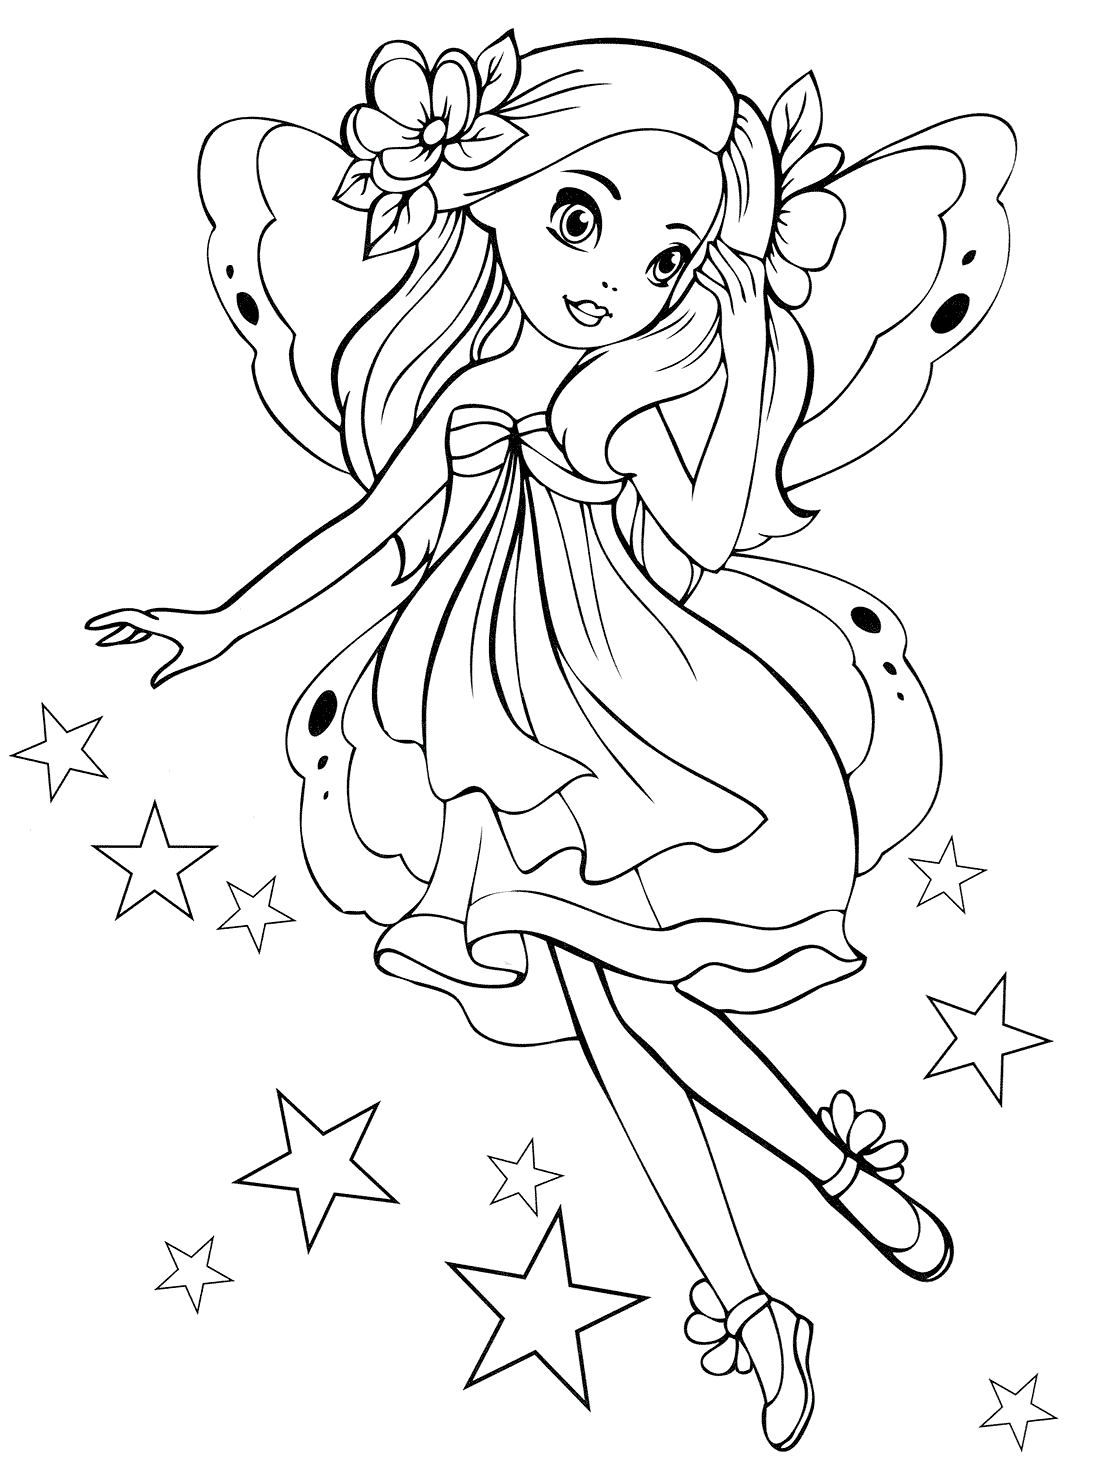 Coloring pages for 8,9,10-year old girls to download and print for free